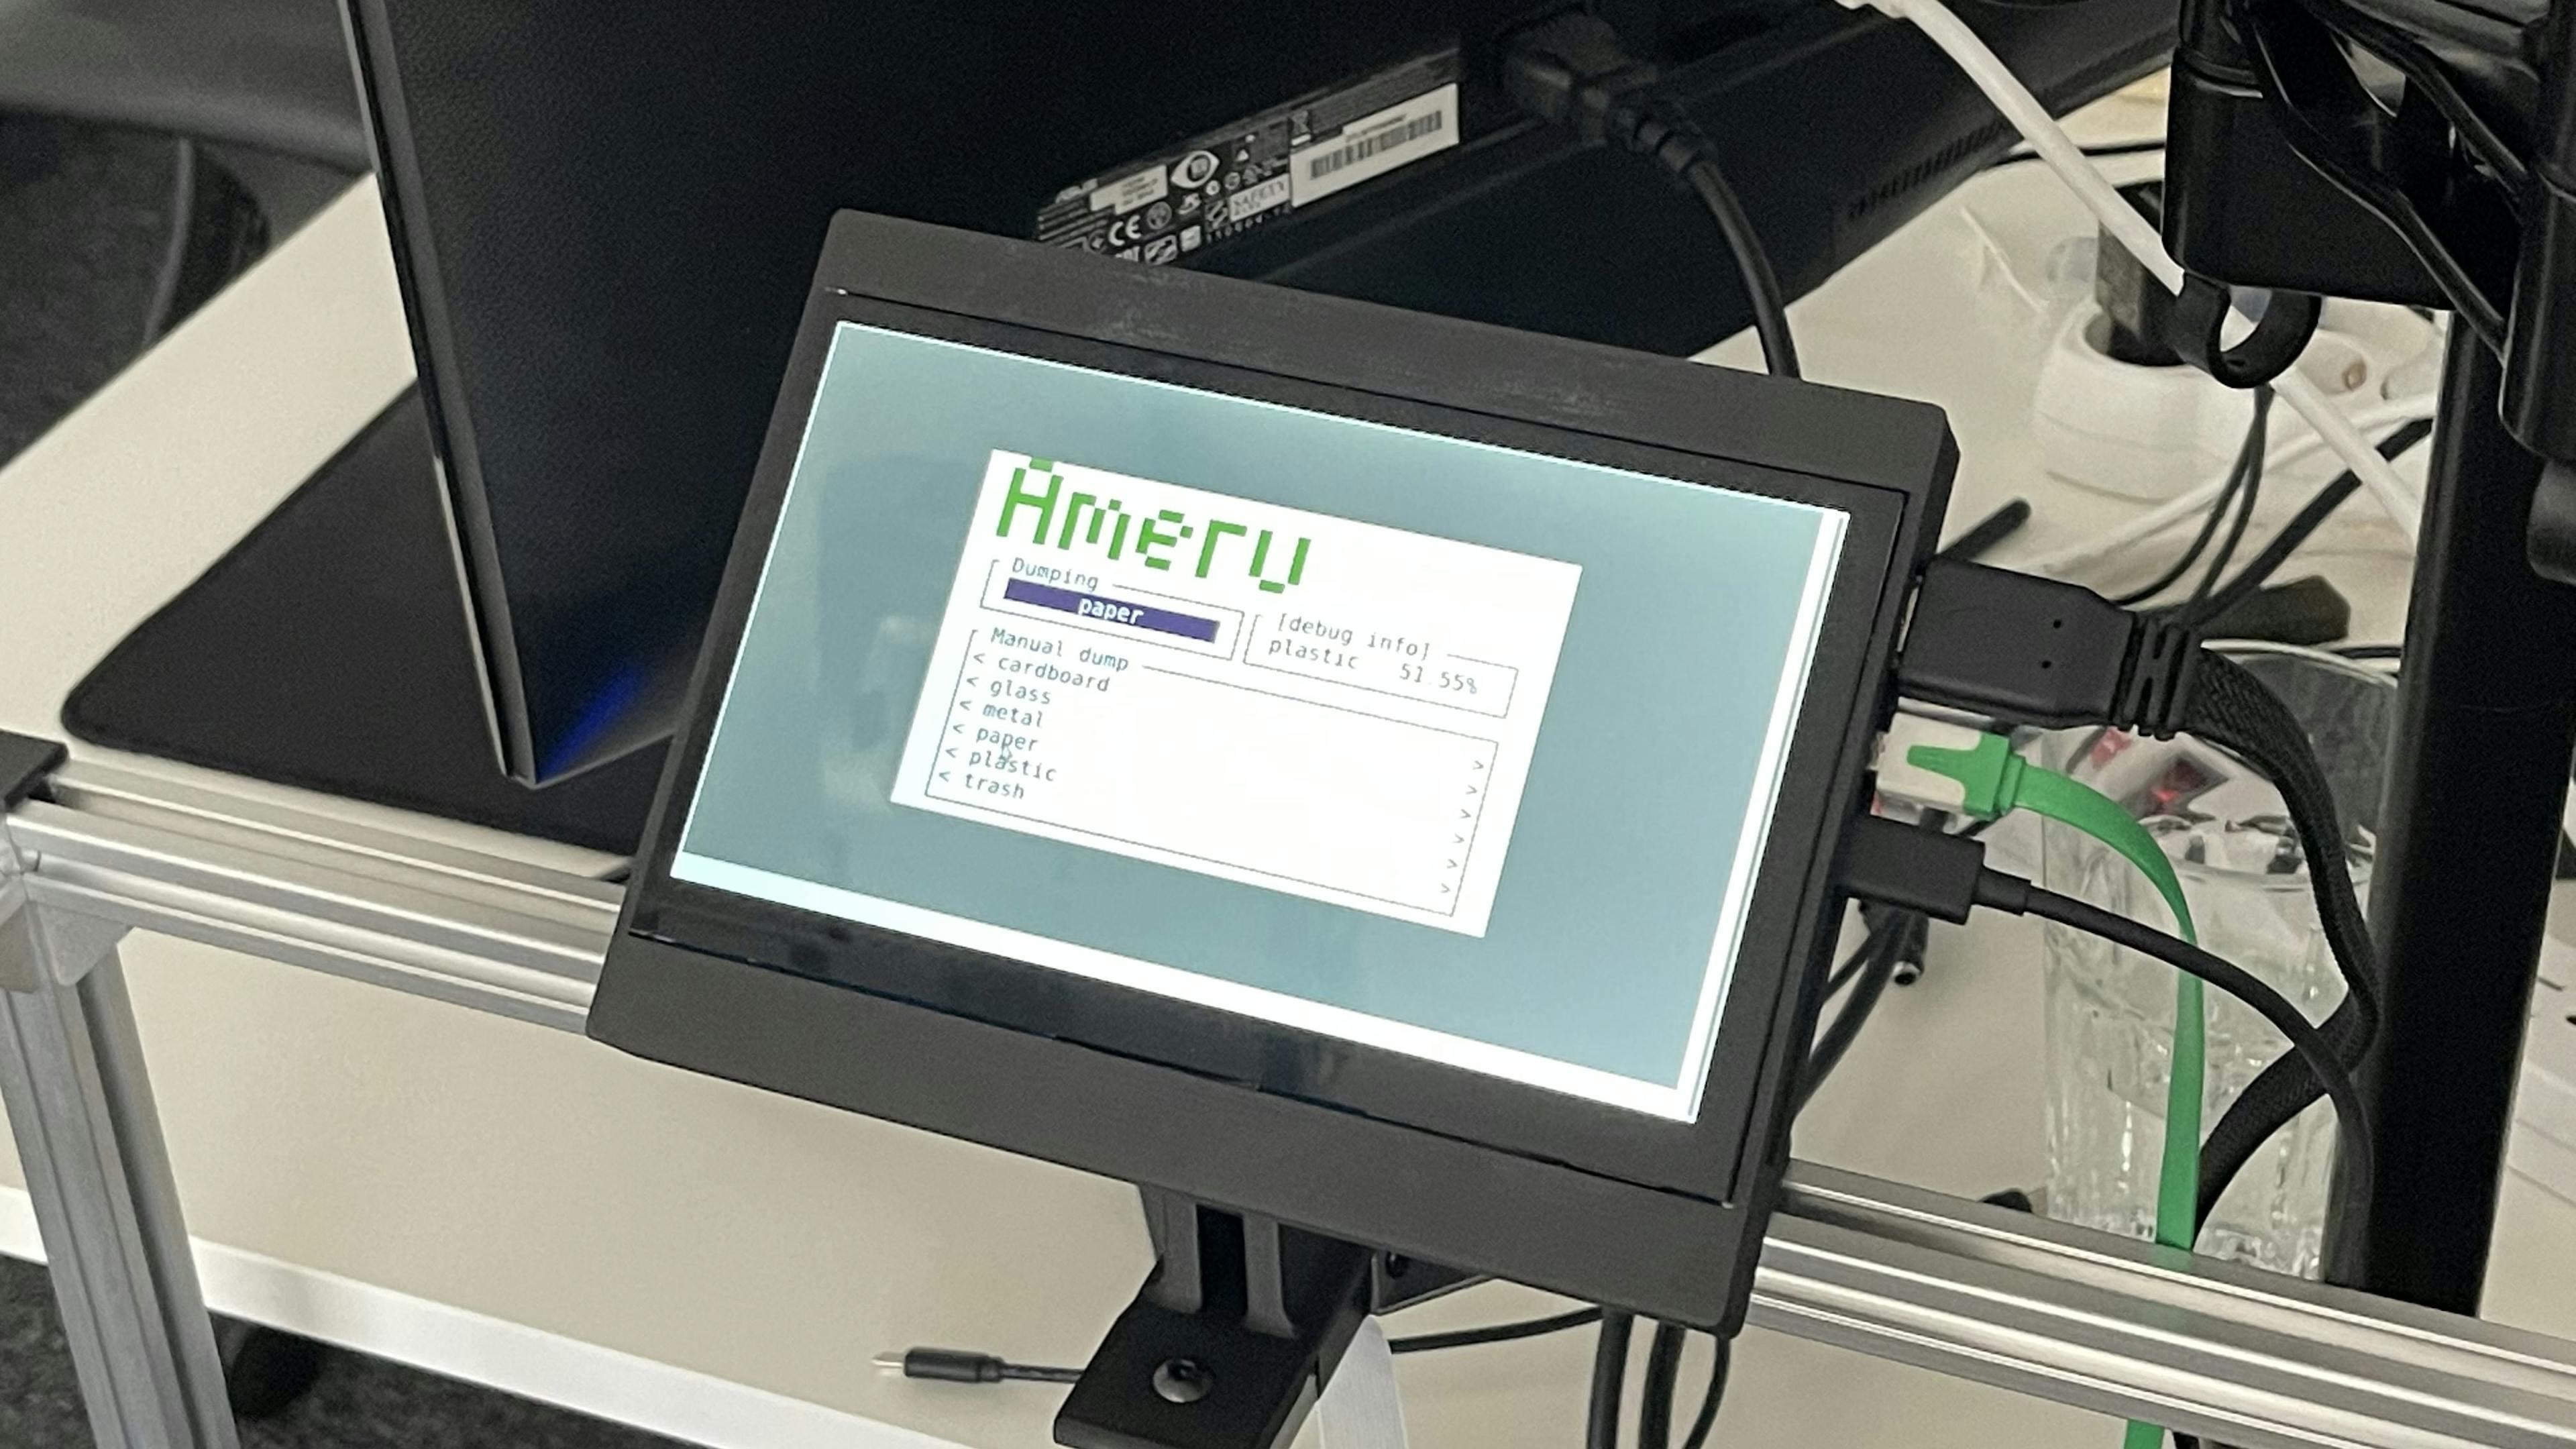 Enhancing User Interface: Ameru Upgraded with a 7-Inch Display and Larger Office Prototype